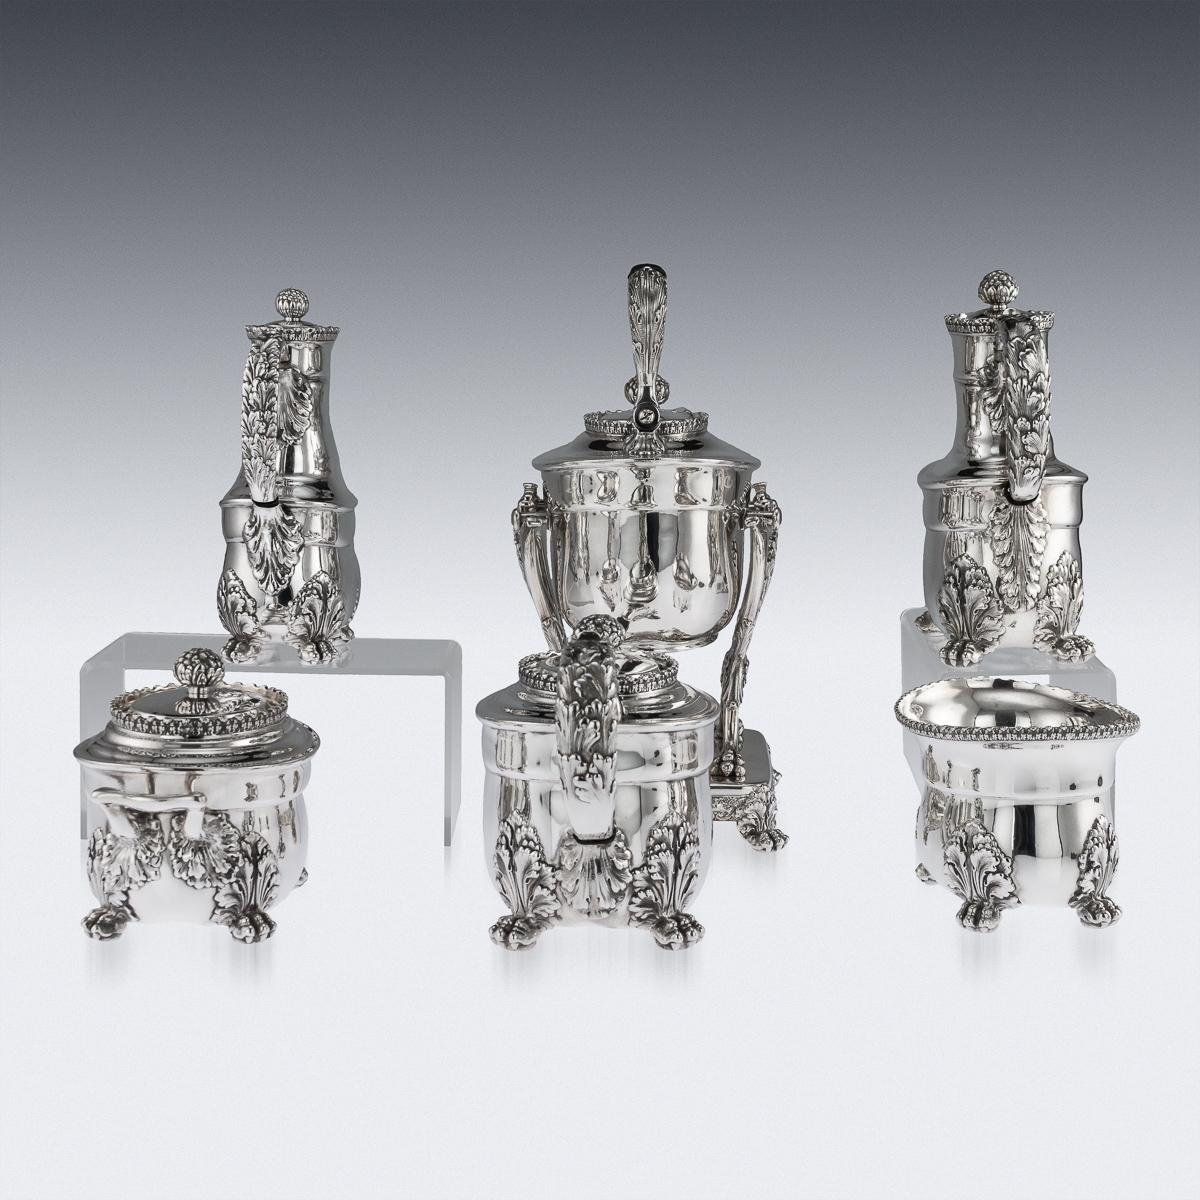 Antique 19th century American rare and magnificent six piece tea service, comprising a kettle, coffee pot, teapot, covered sugar bowl, waist bowl, covered cream jug, each piece on four lion paw feet, plain can shaped body applied with large acanthus